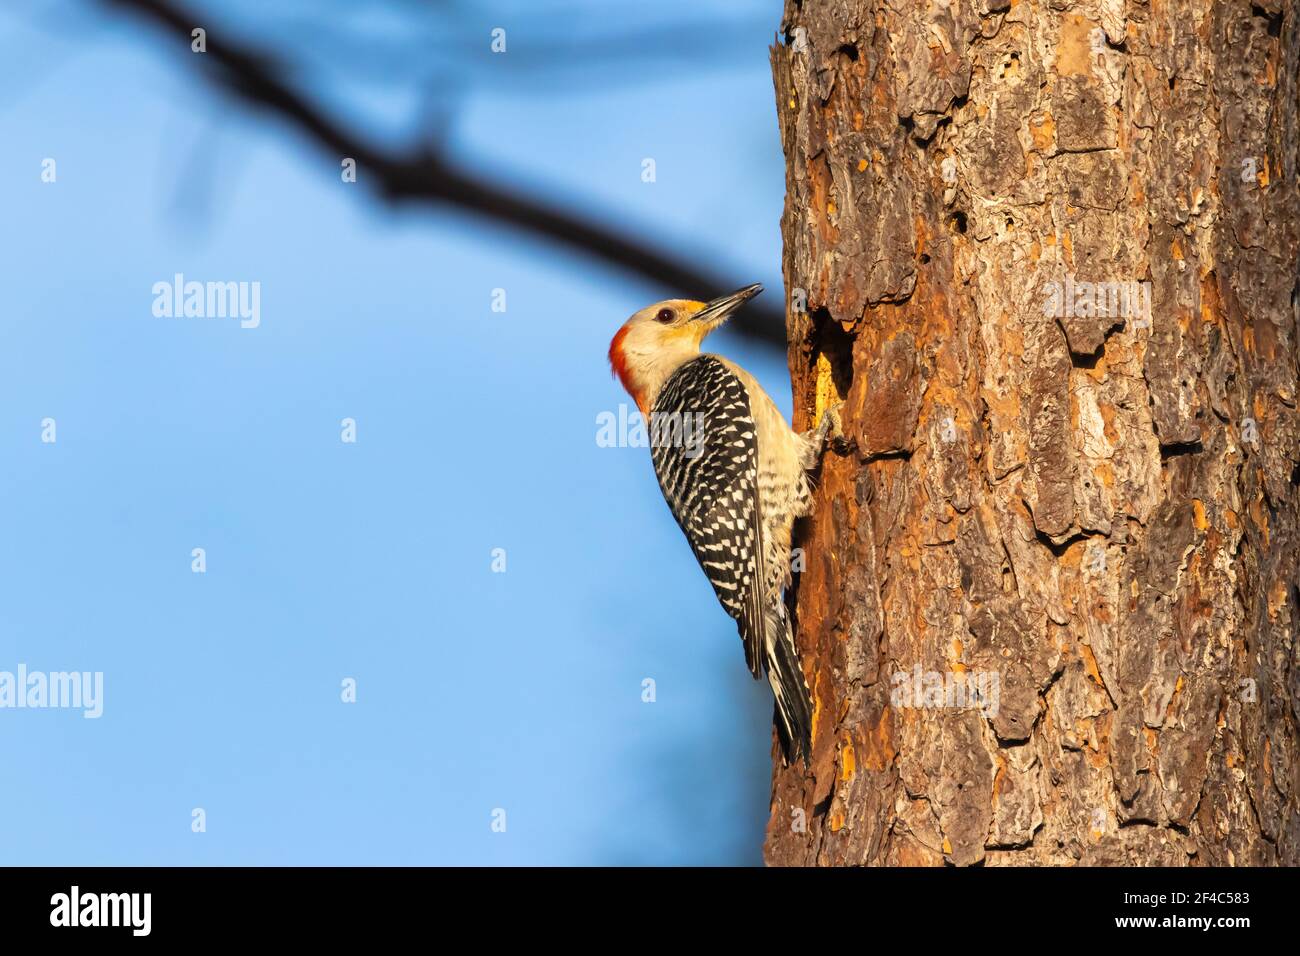 Red-bellied woodpecker at a nest cavity bringing food to her young. Stock Photo